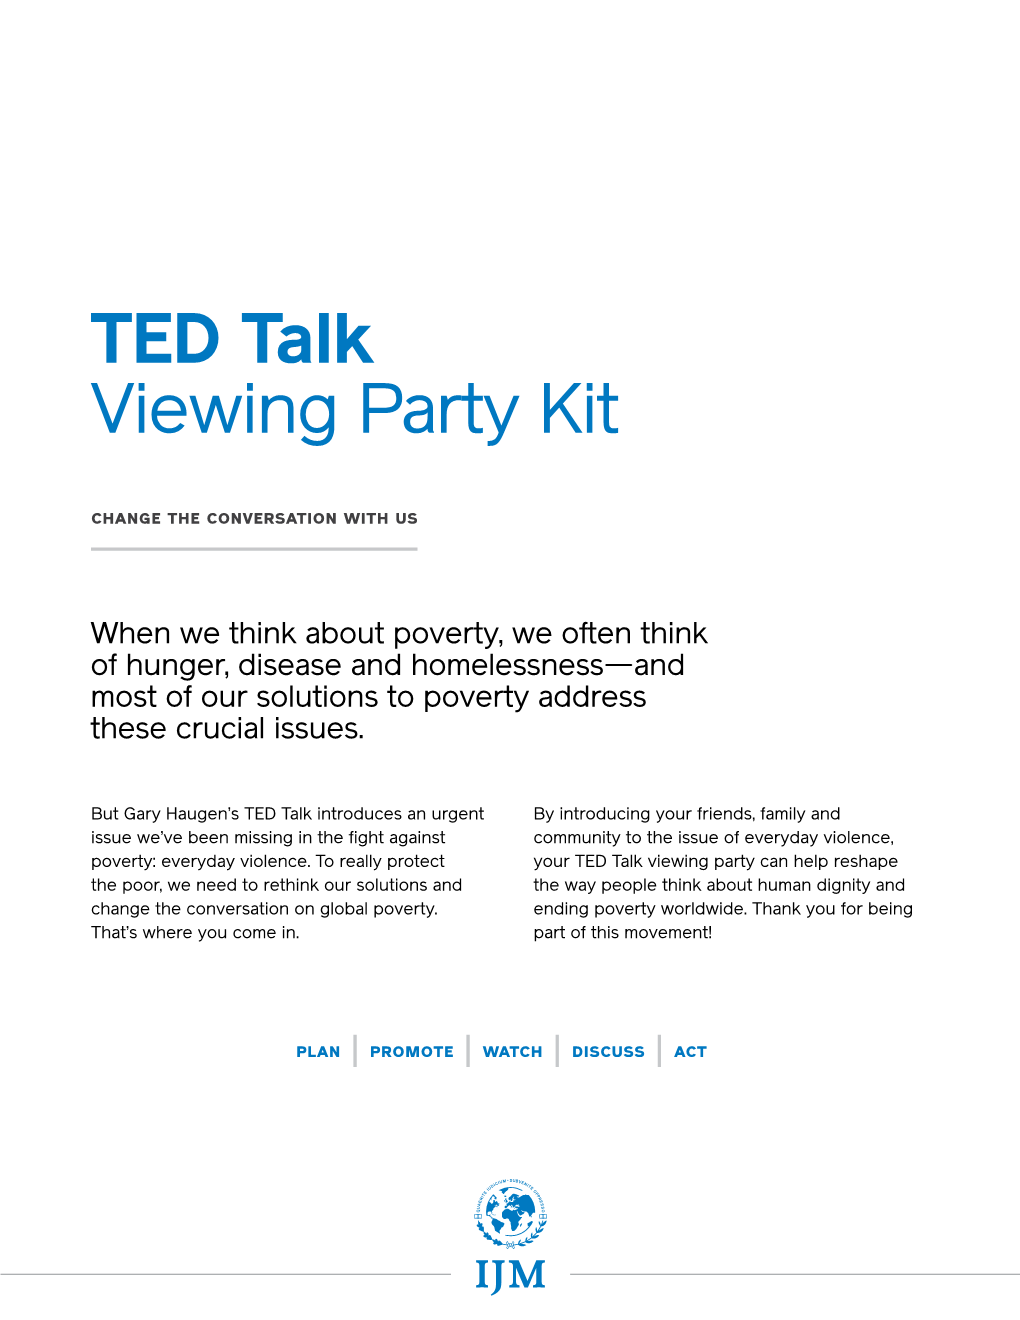 TED Talk Viewing Party Kit